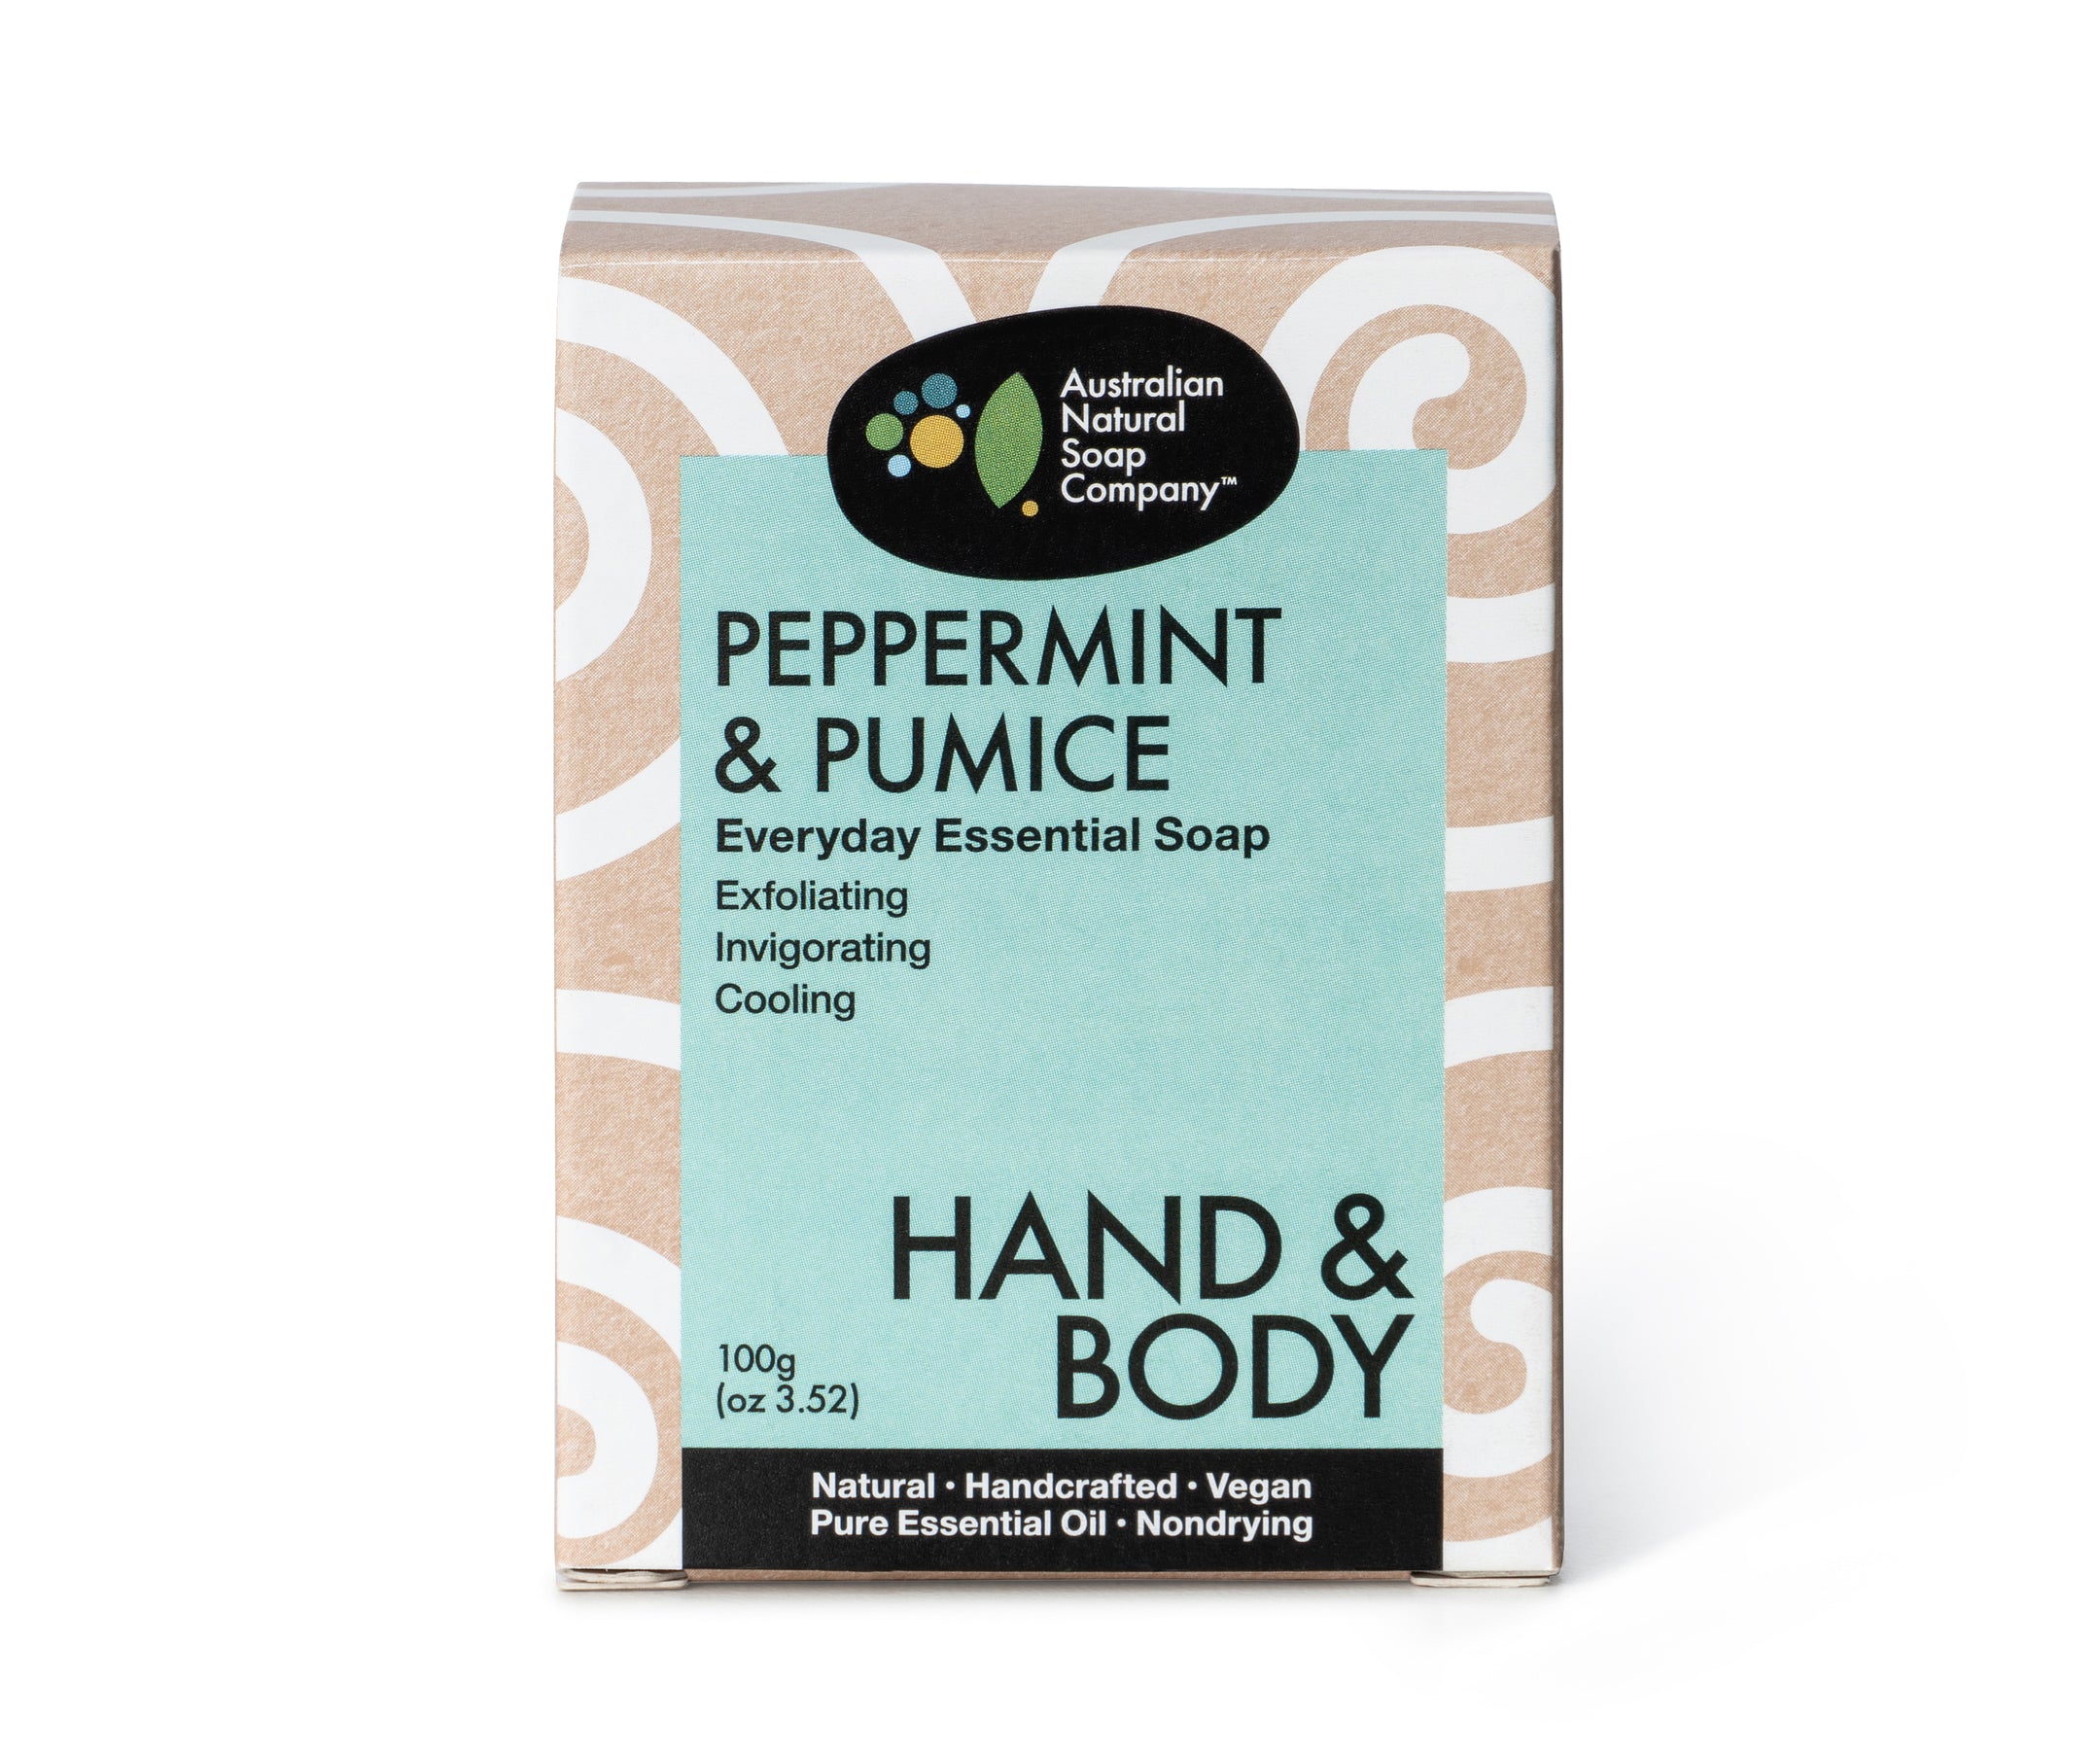 Australian Natural Soap Company peppermint and pumice hand and body bar front of box